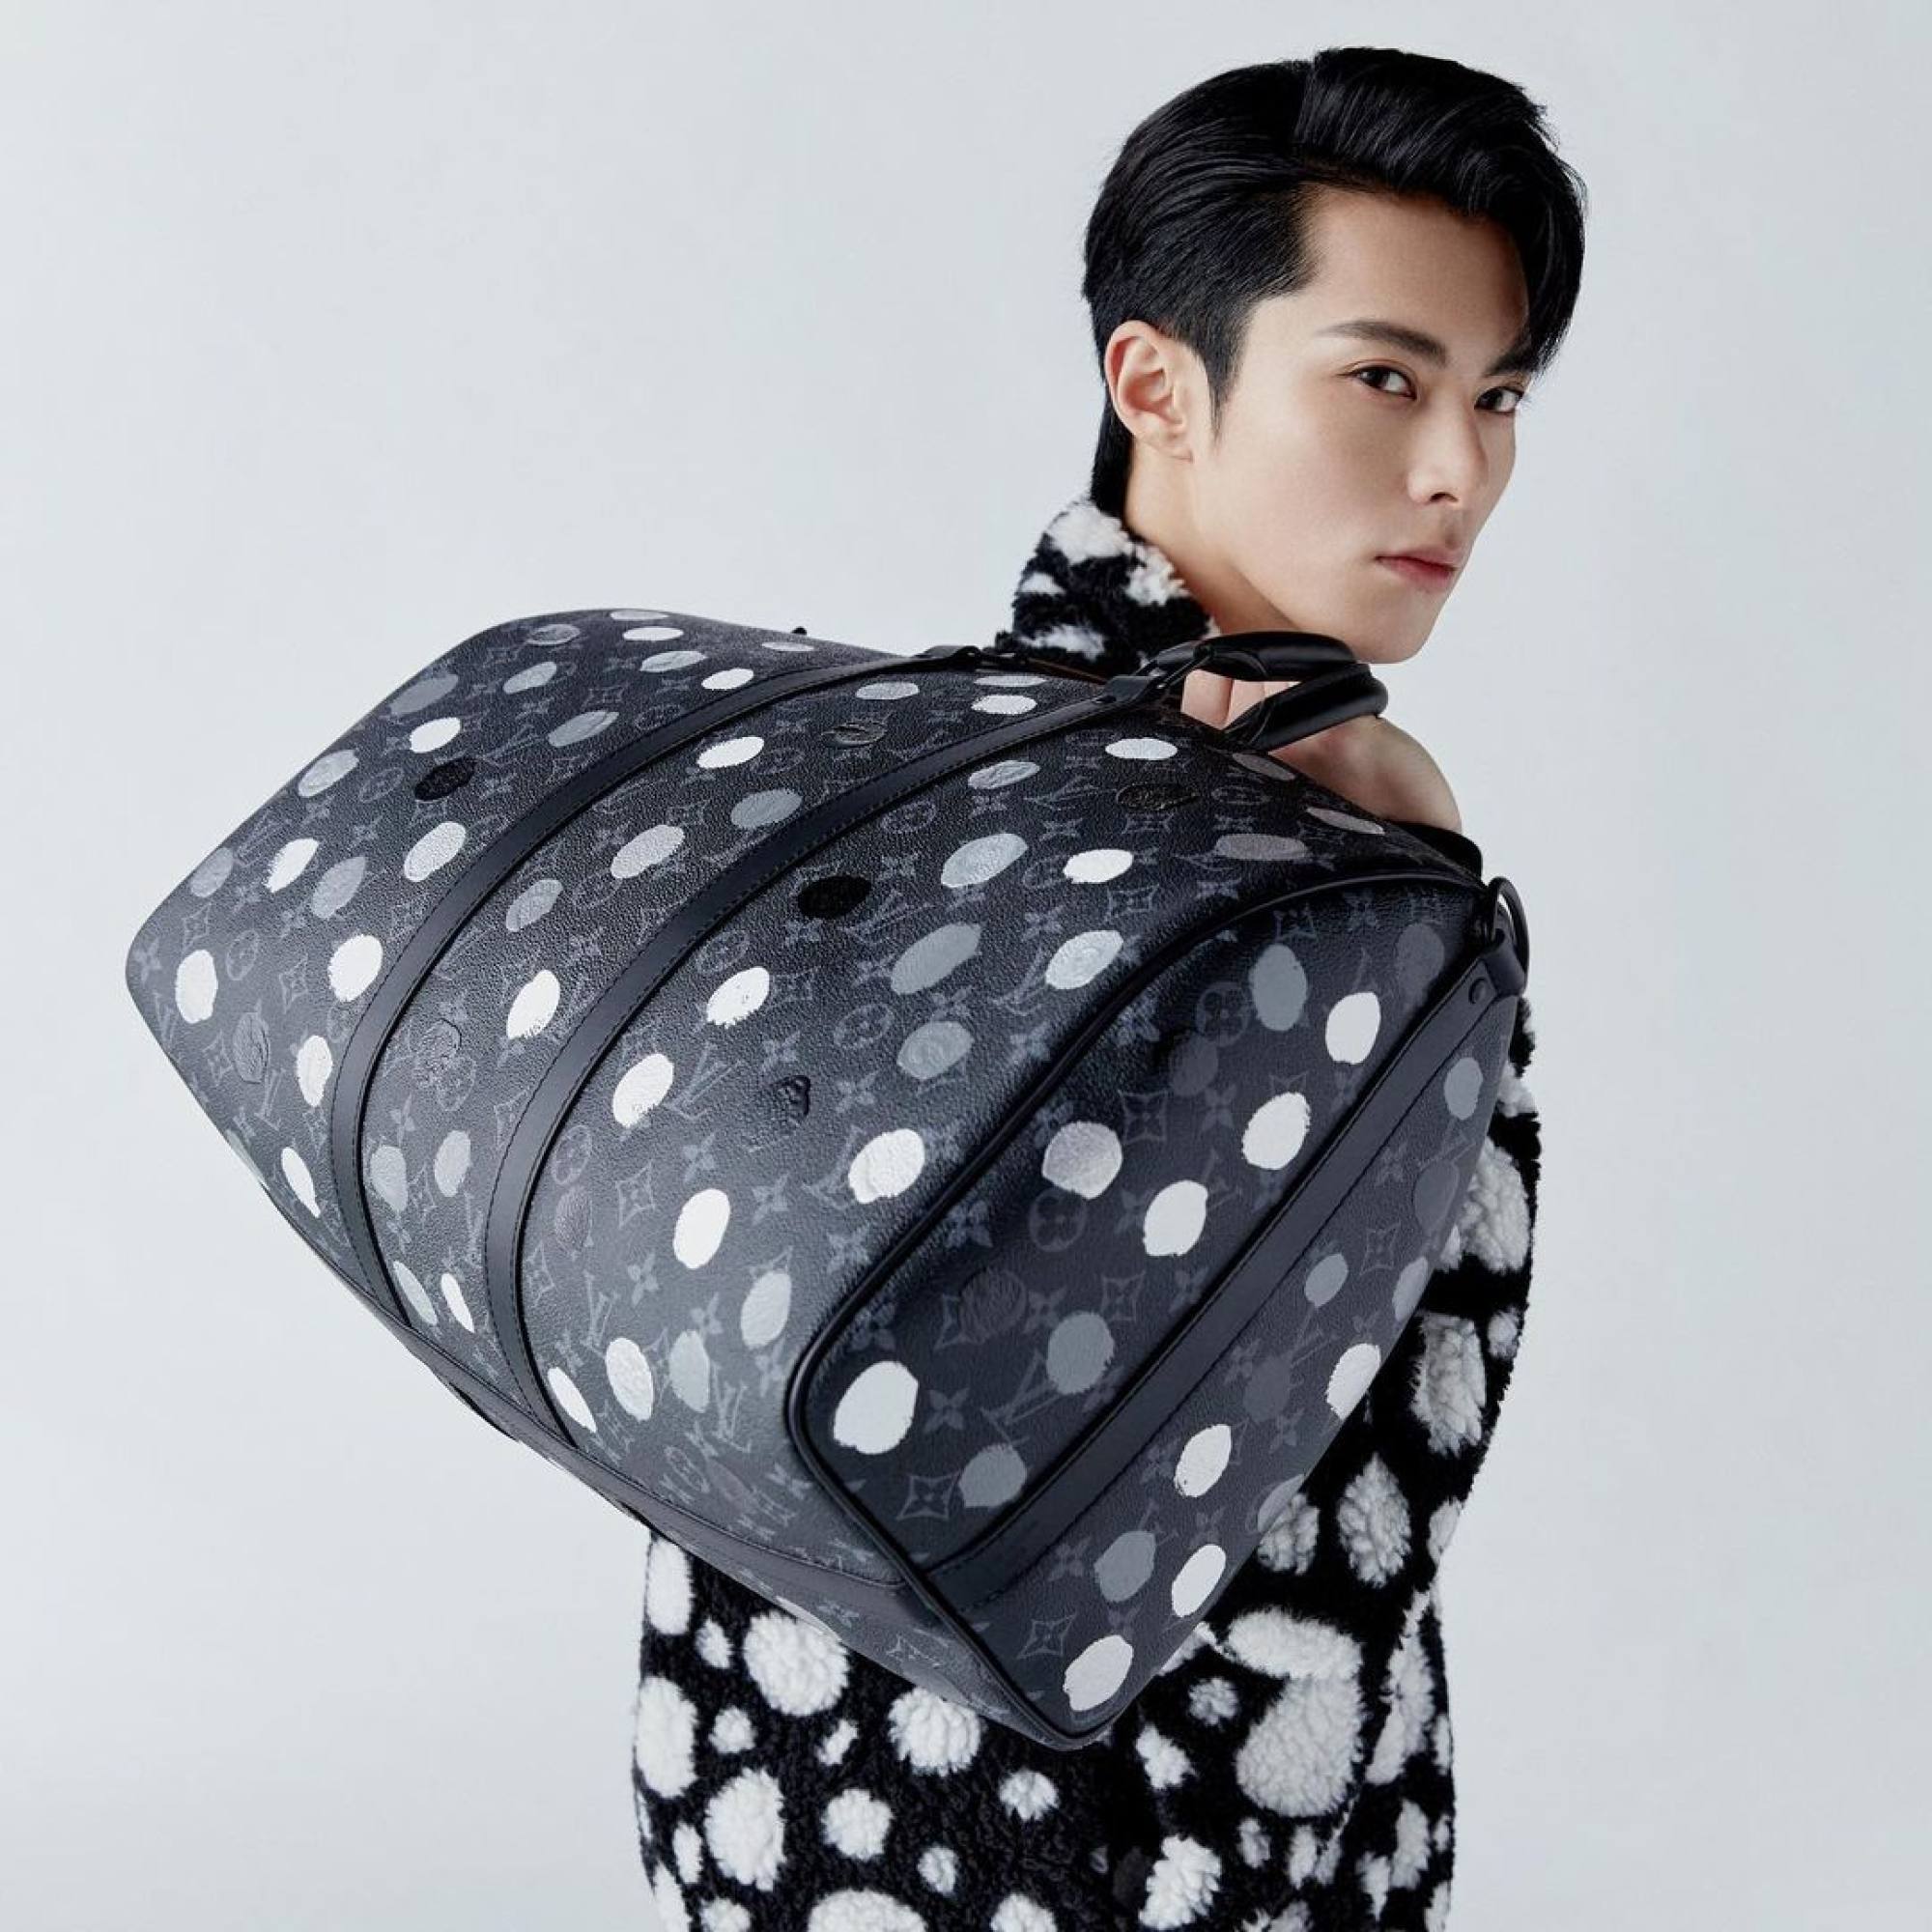 China's Next Big Thing? Who Is Louis Vuitton's Latest Ambassador Dylan  Wang?